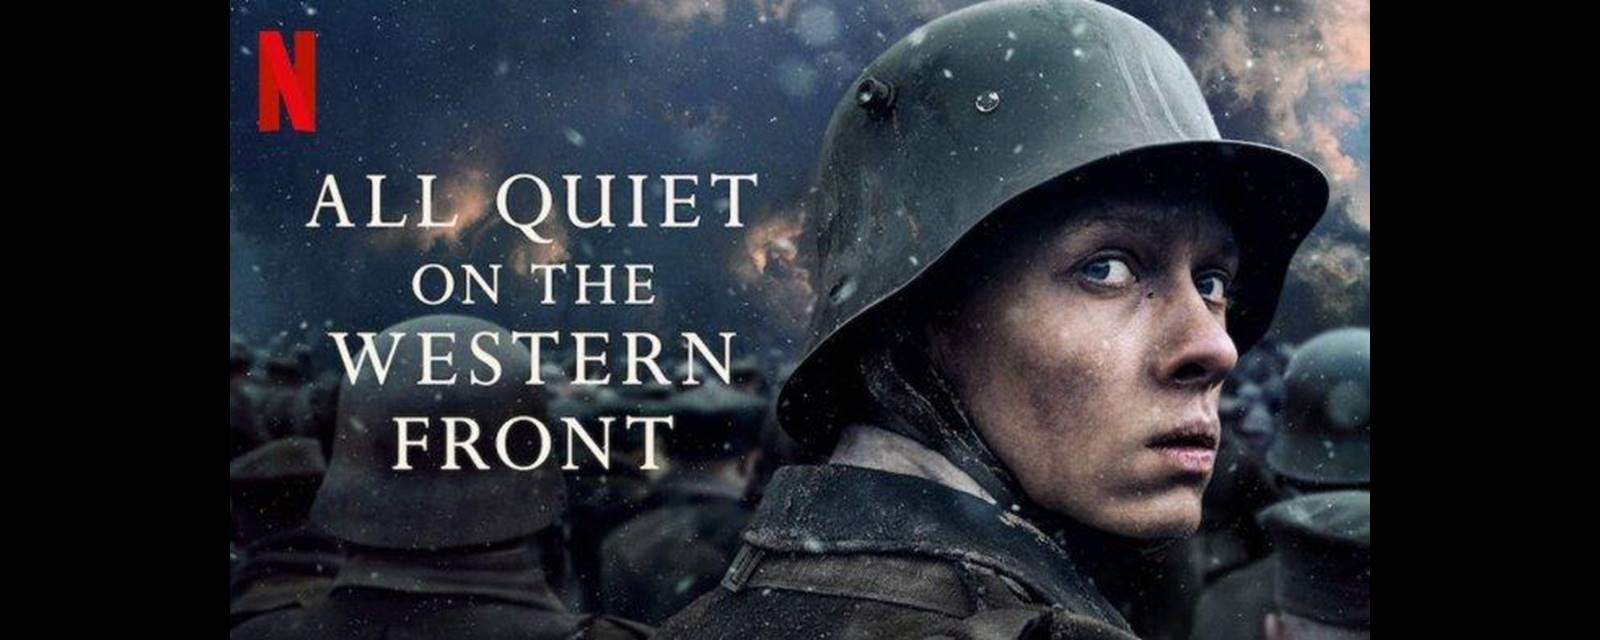 All Quiet on the Western Front image